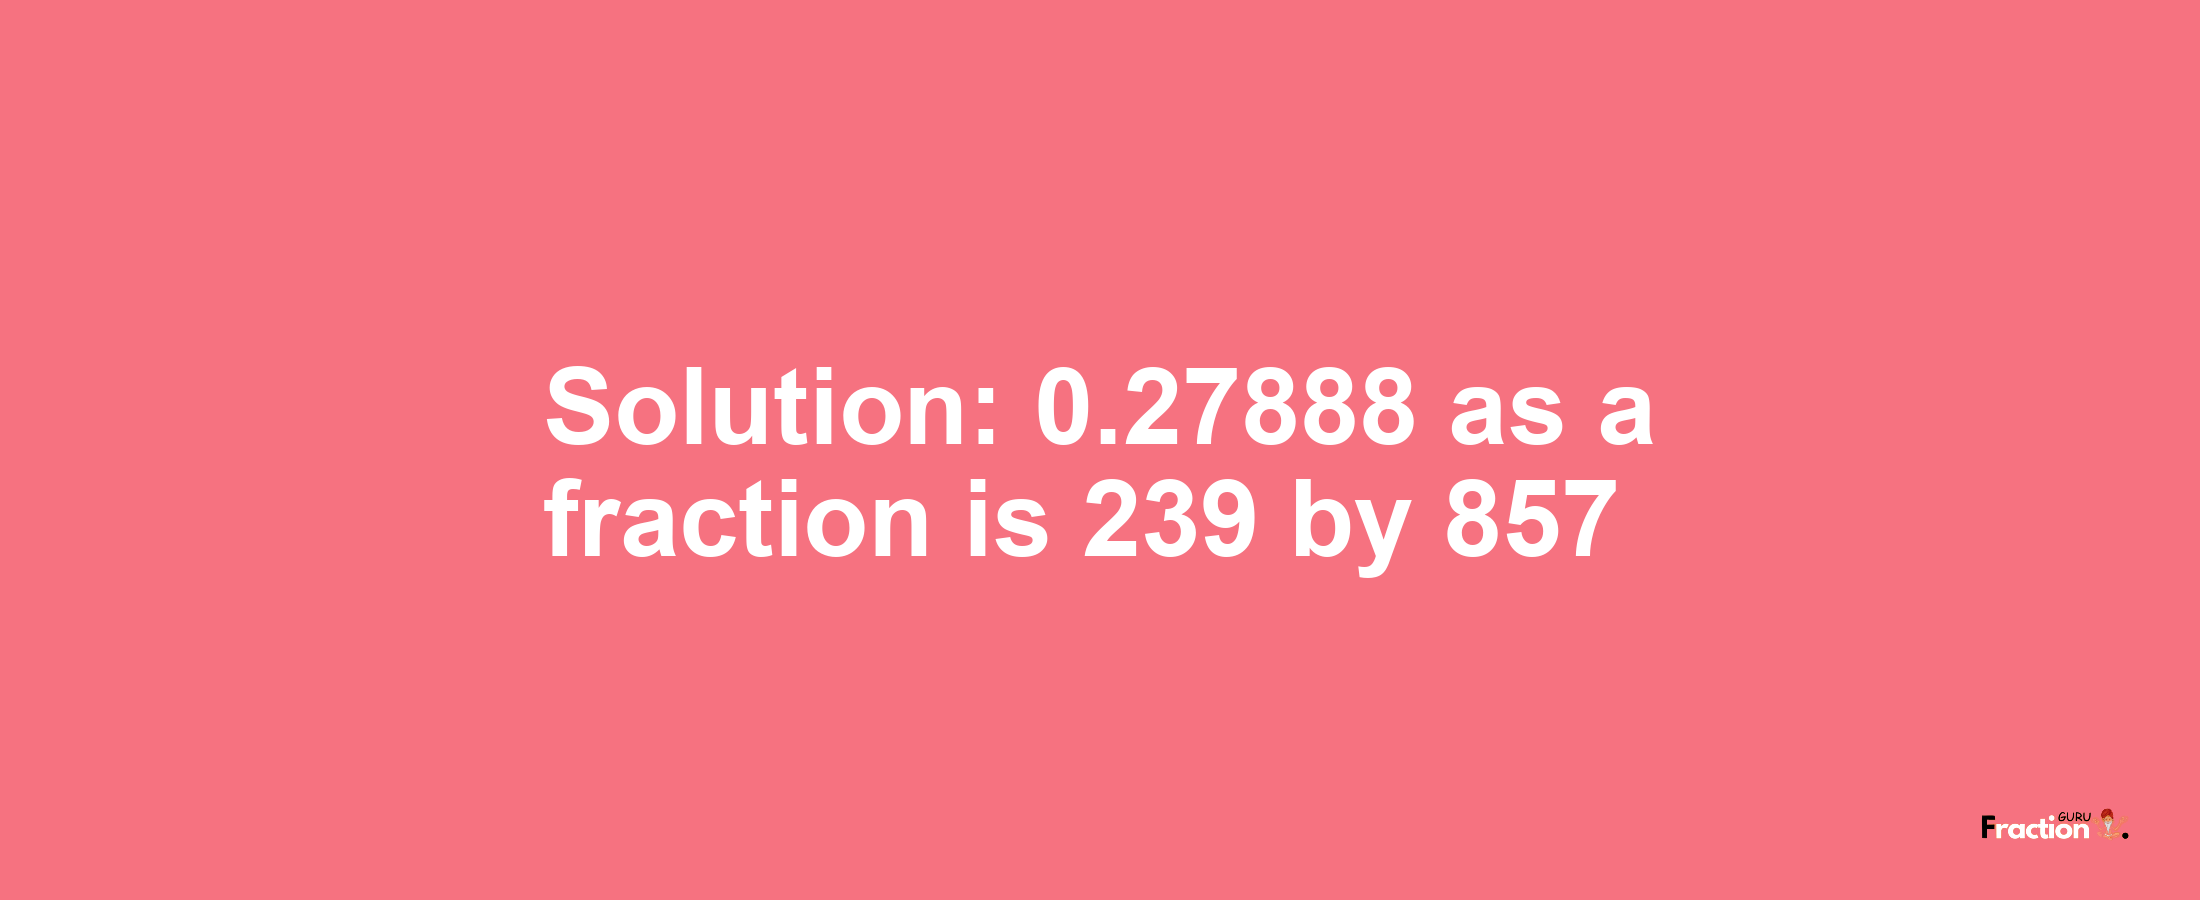 Solution:0.27888 as a fraction is 239/857